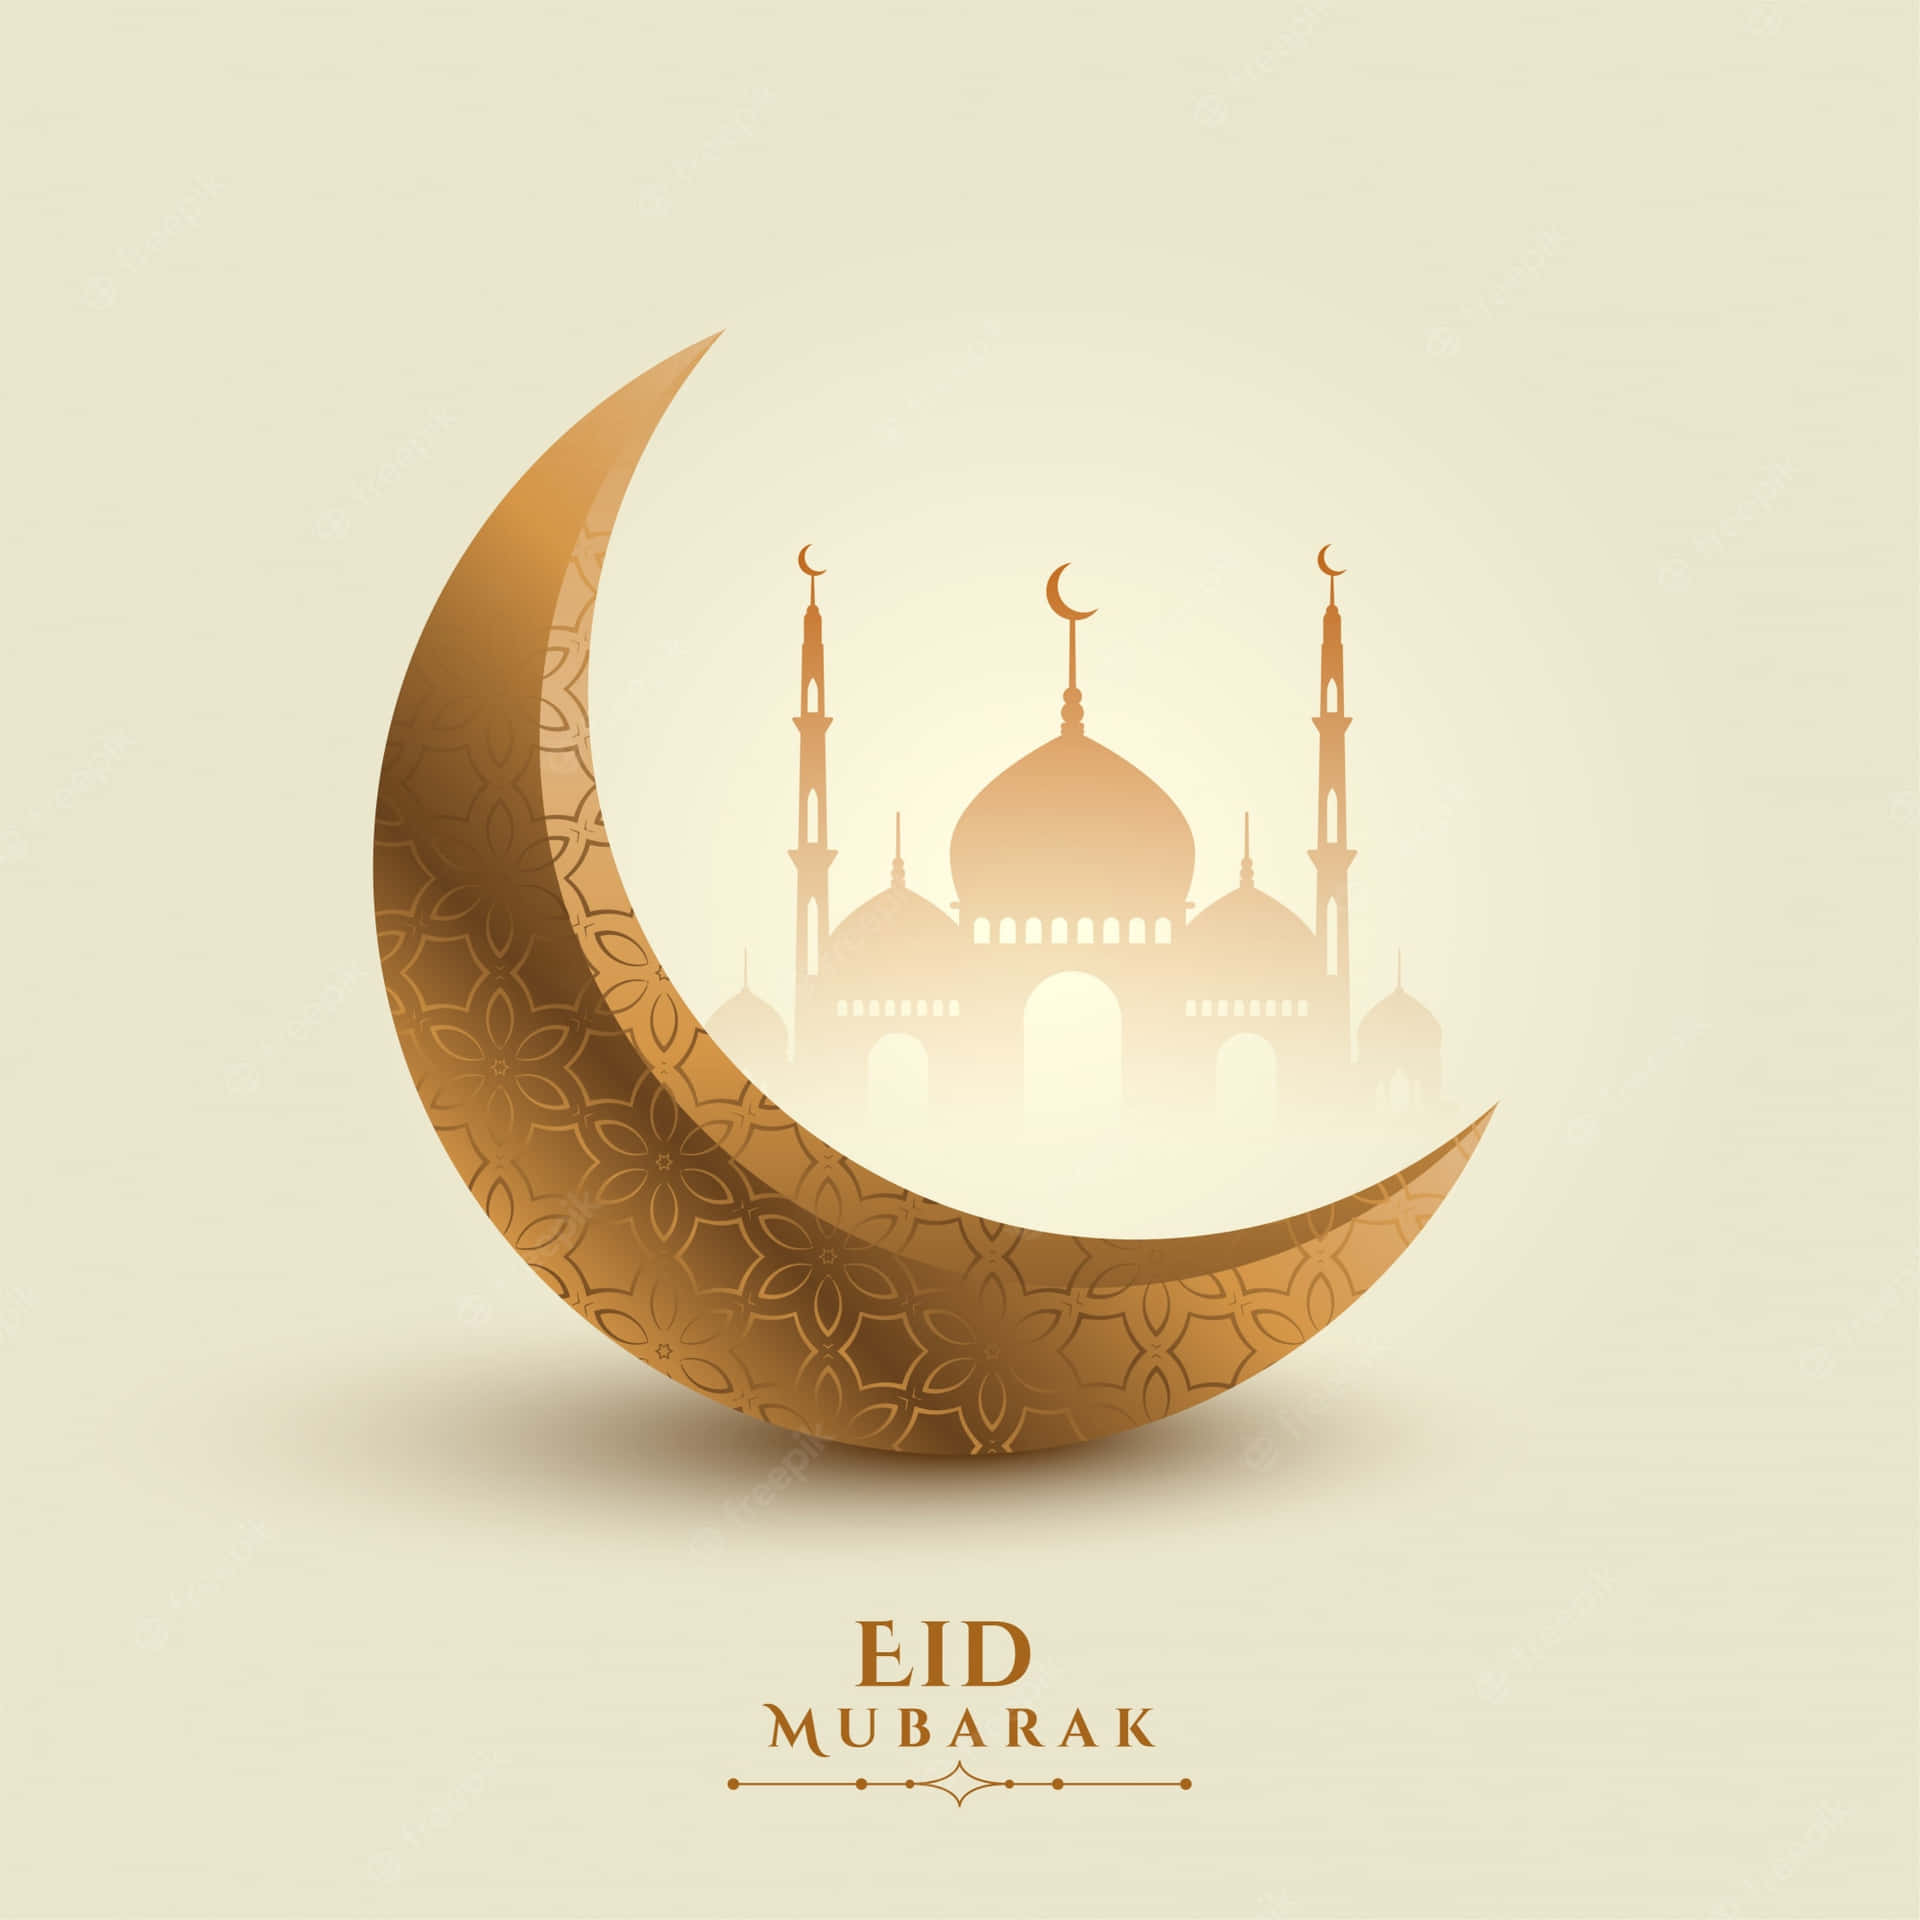 Celebrate Eid Mubarak with your friends and family.